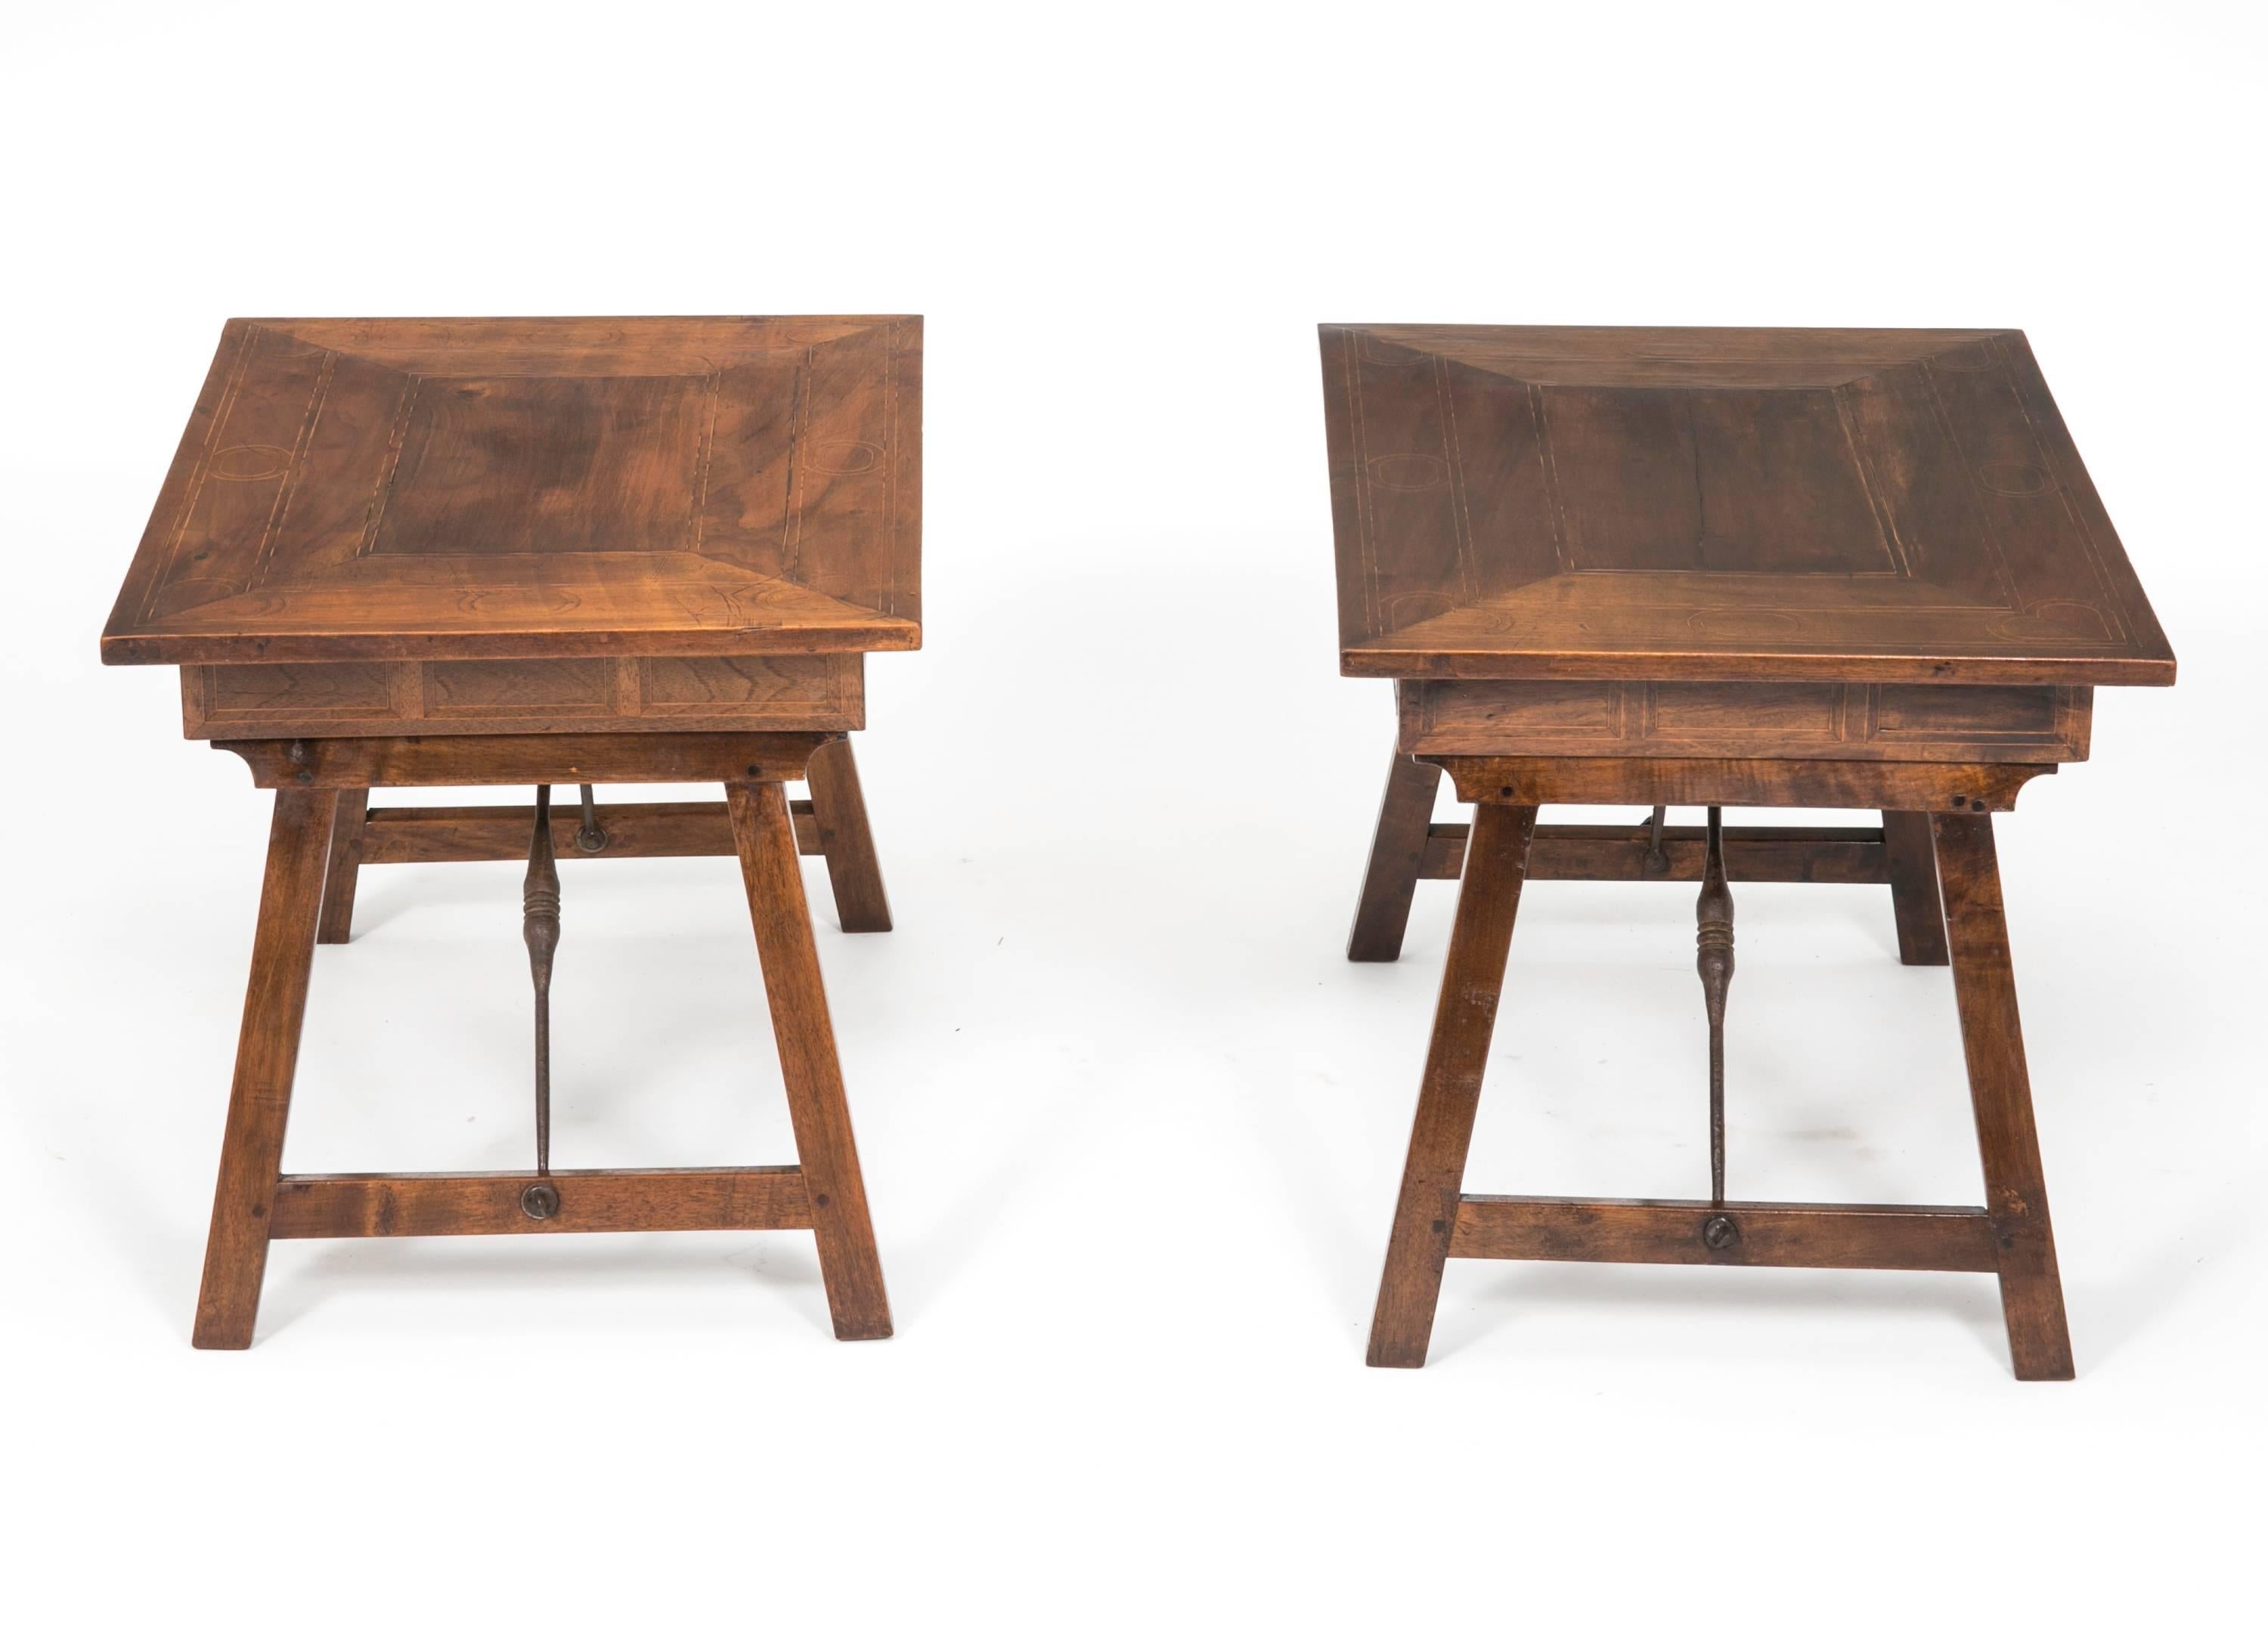 Hand-Crafted Side Tables, Pair, Antique English Walnut For Sale